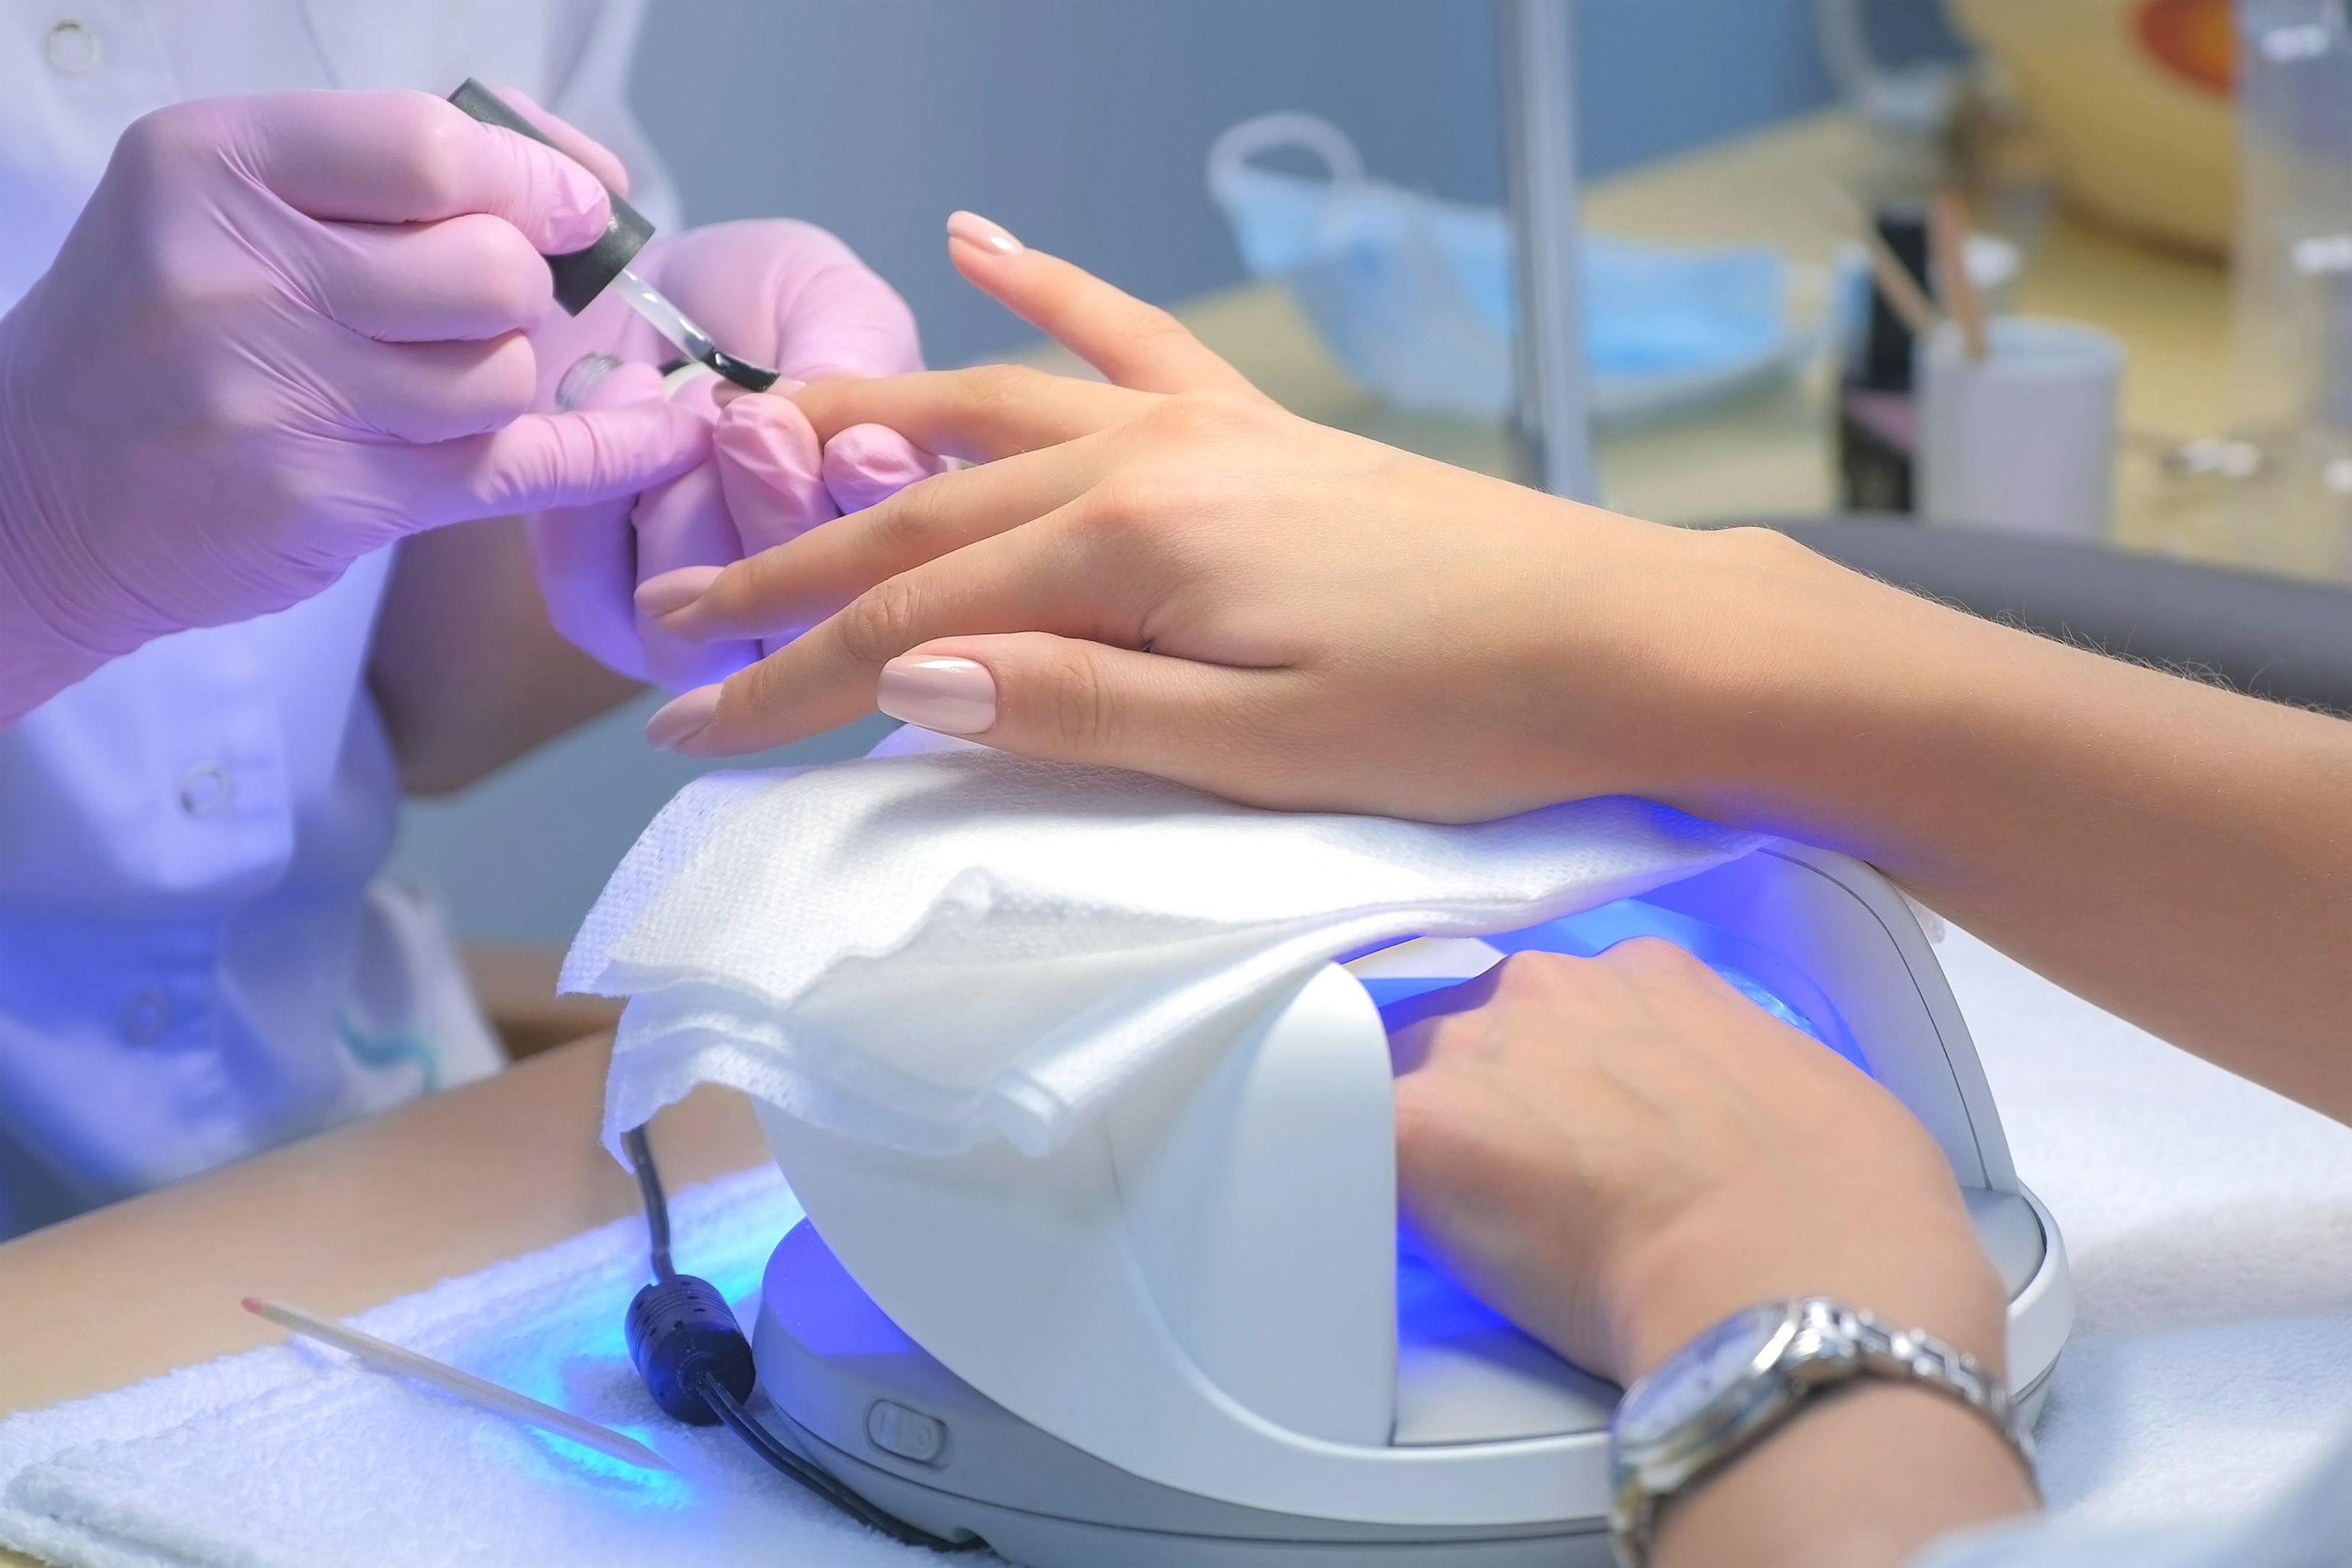 Study Finds Cancer Risk Associated With UV Nail Dryers